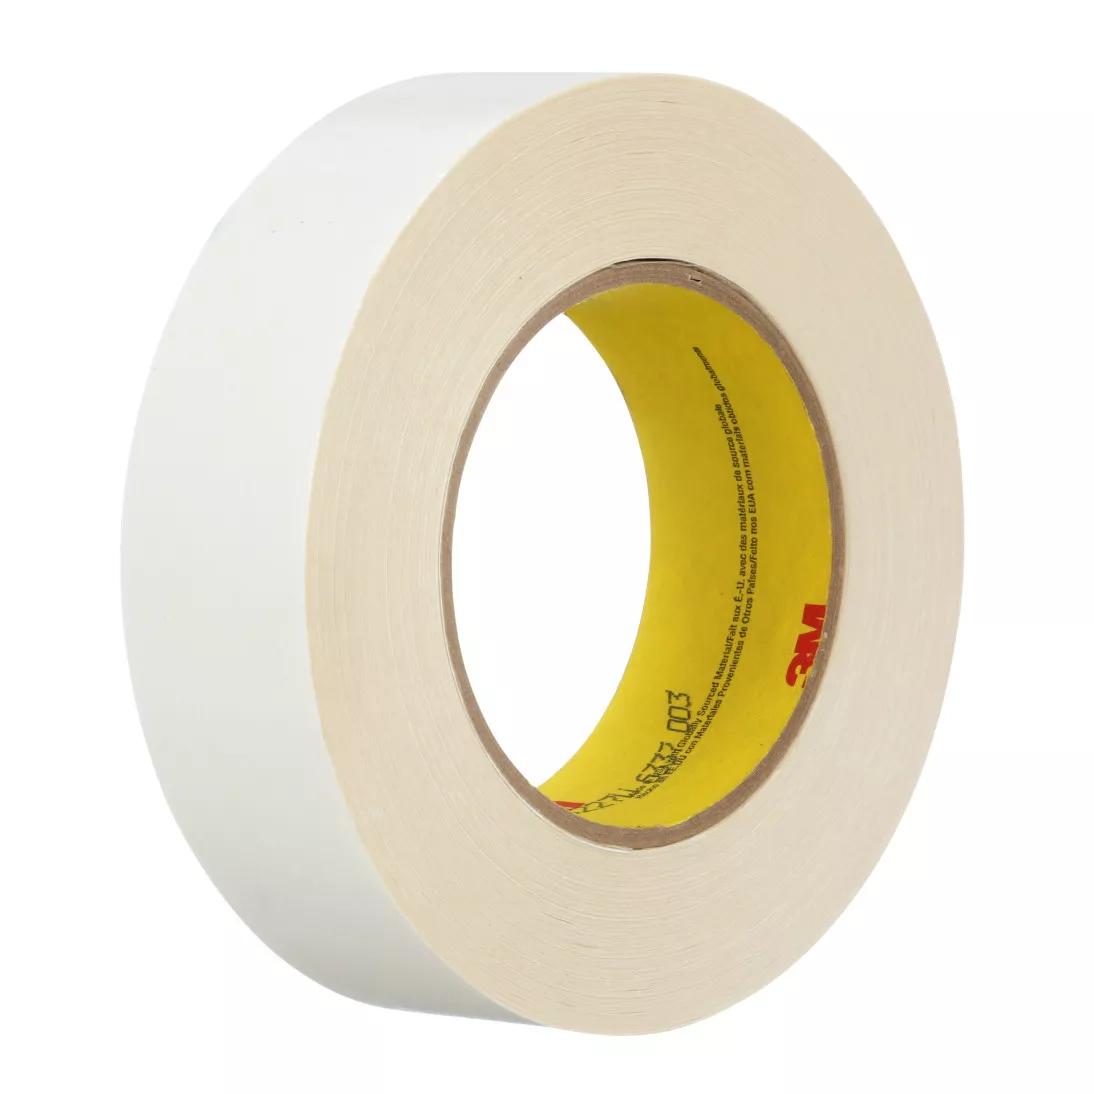 3M™ Repulpable Double Coated Tape R3227, White, 24 mm x 55 m, 3.5 mil,
36 Roll/Case